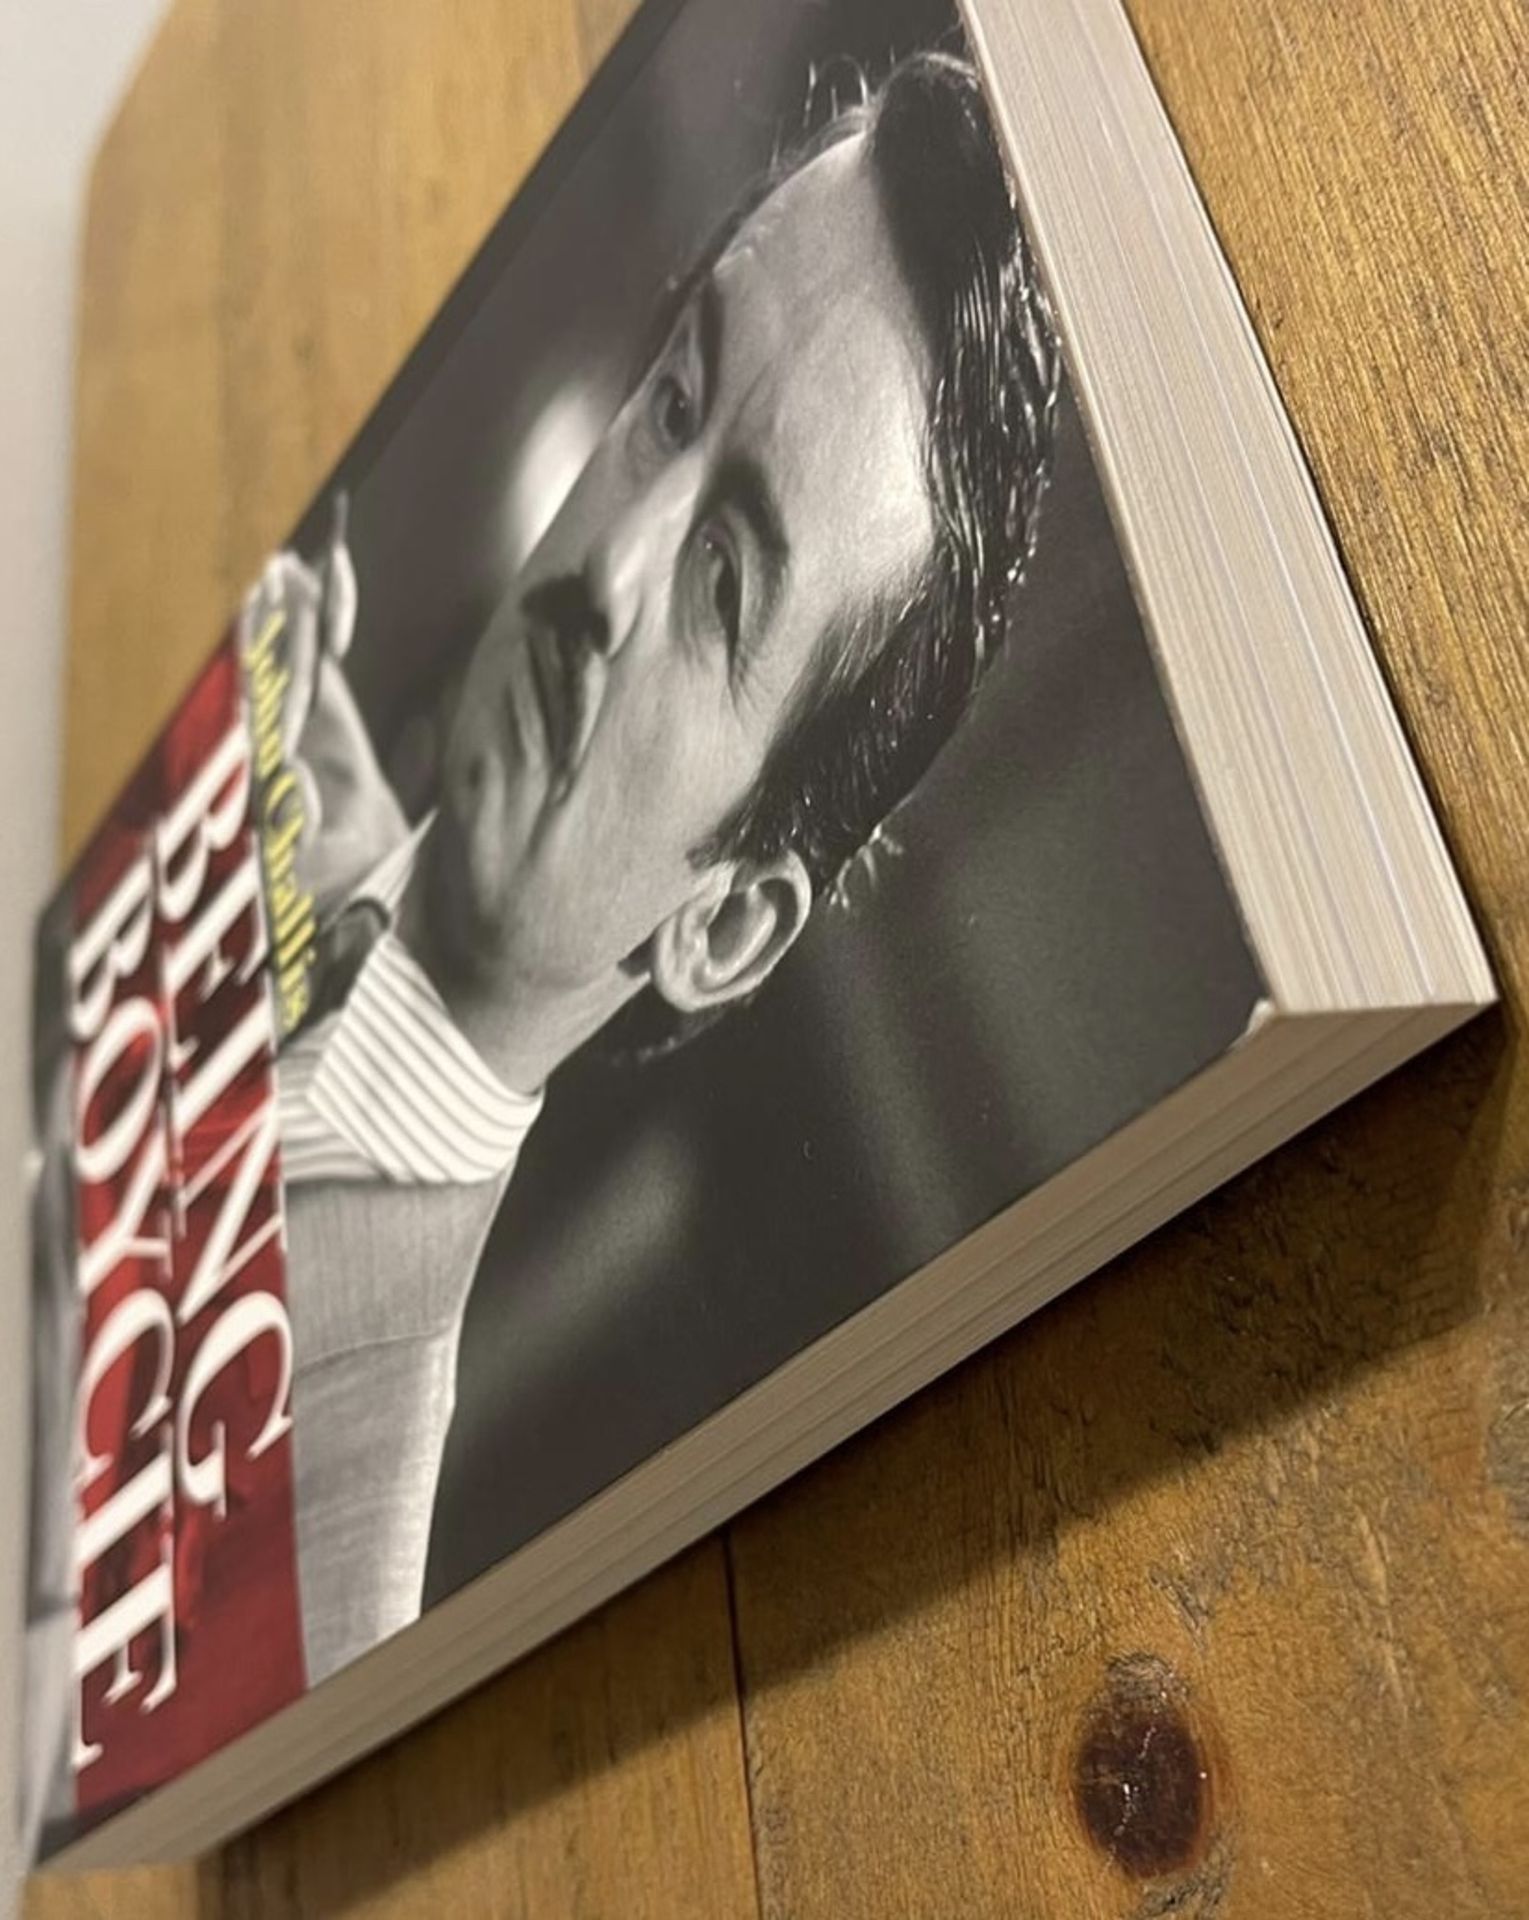 BOYCIEâ€™ BOOK, HAND SIGNED BY â€˜JOHN CHALLISâ€™ OF ONLY FOOLS & HORSES - NO VAT! - Image 4 of 8